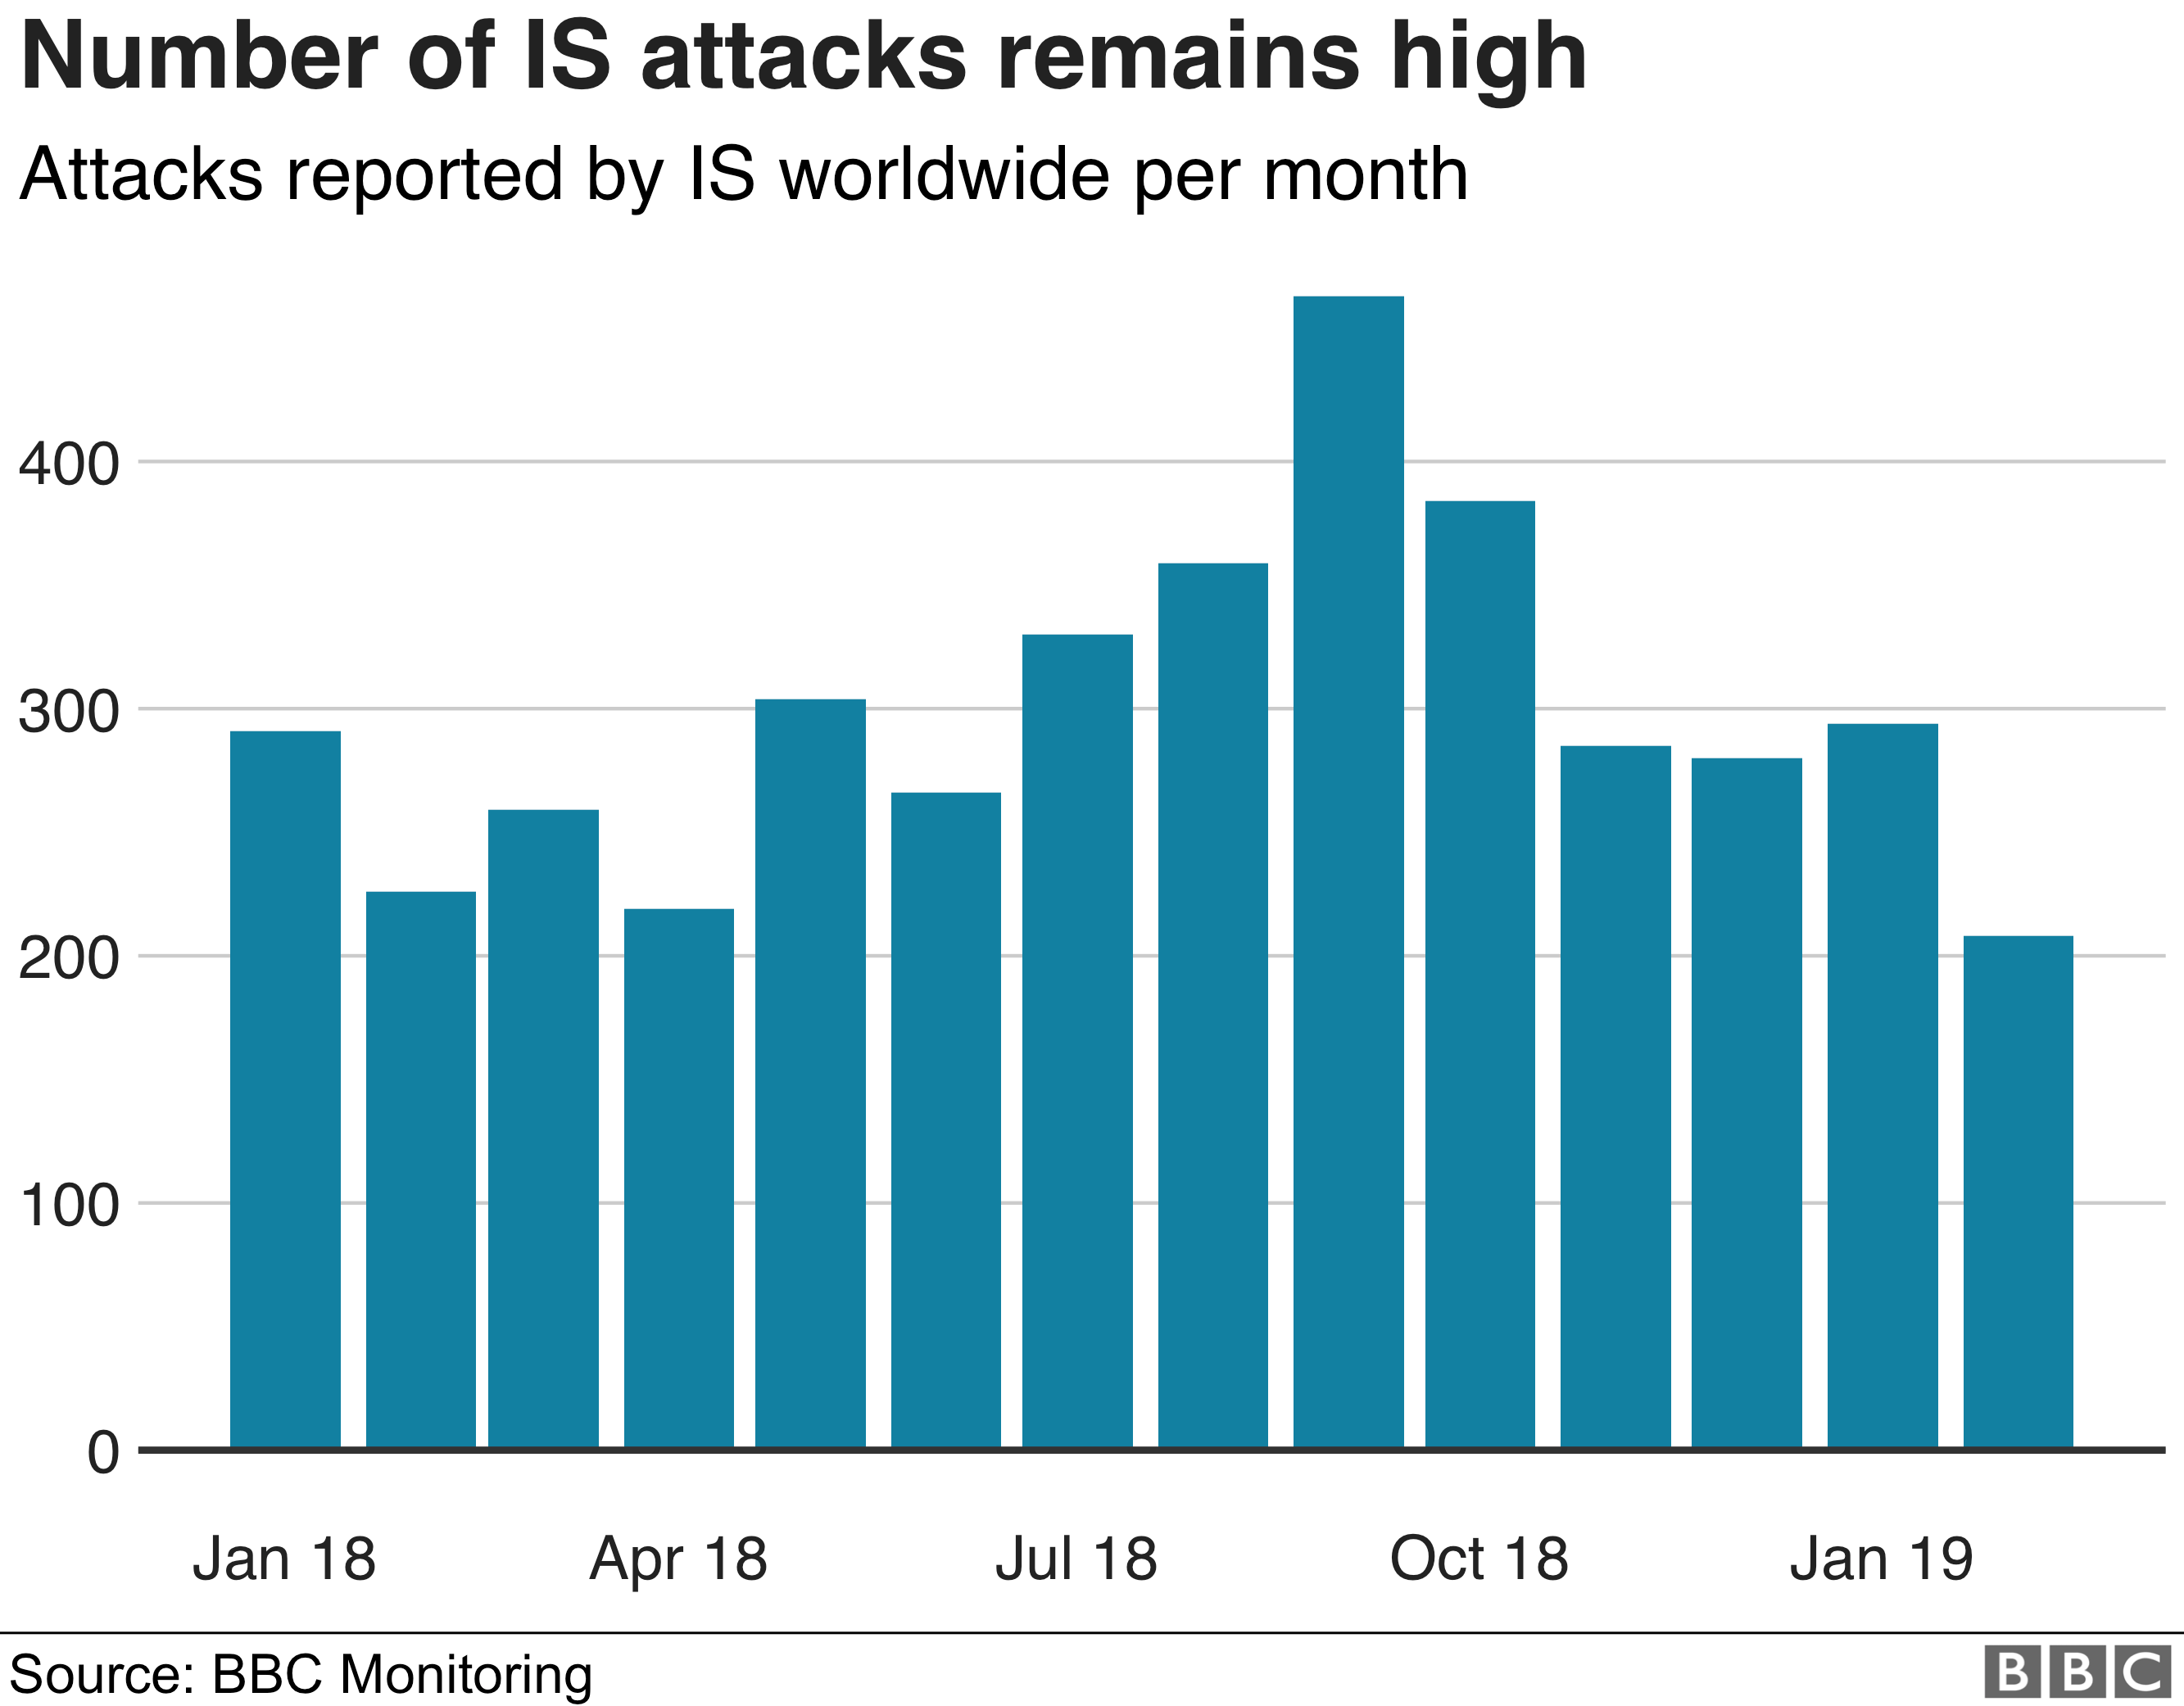 Chart showing number of worldwide attacks by IS per month